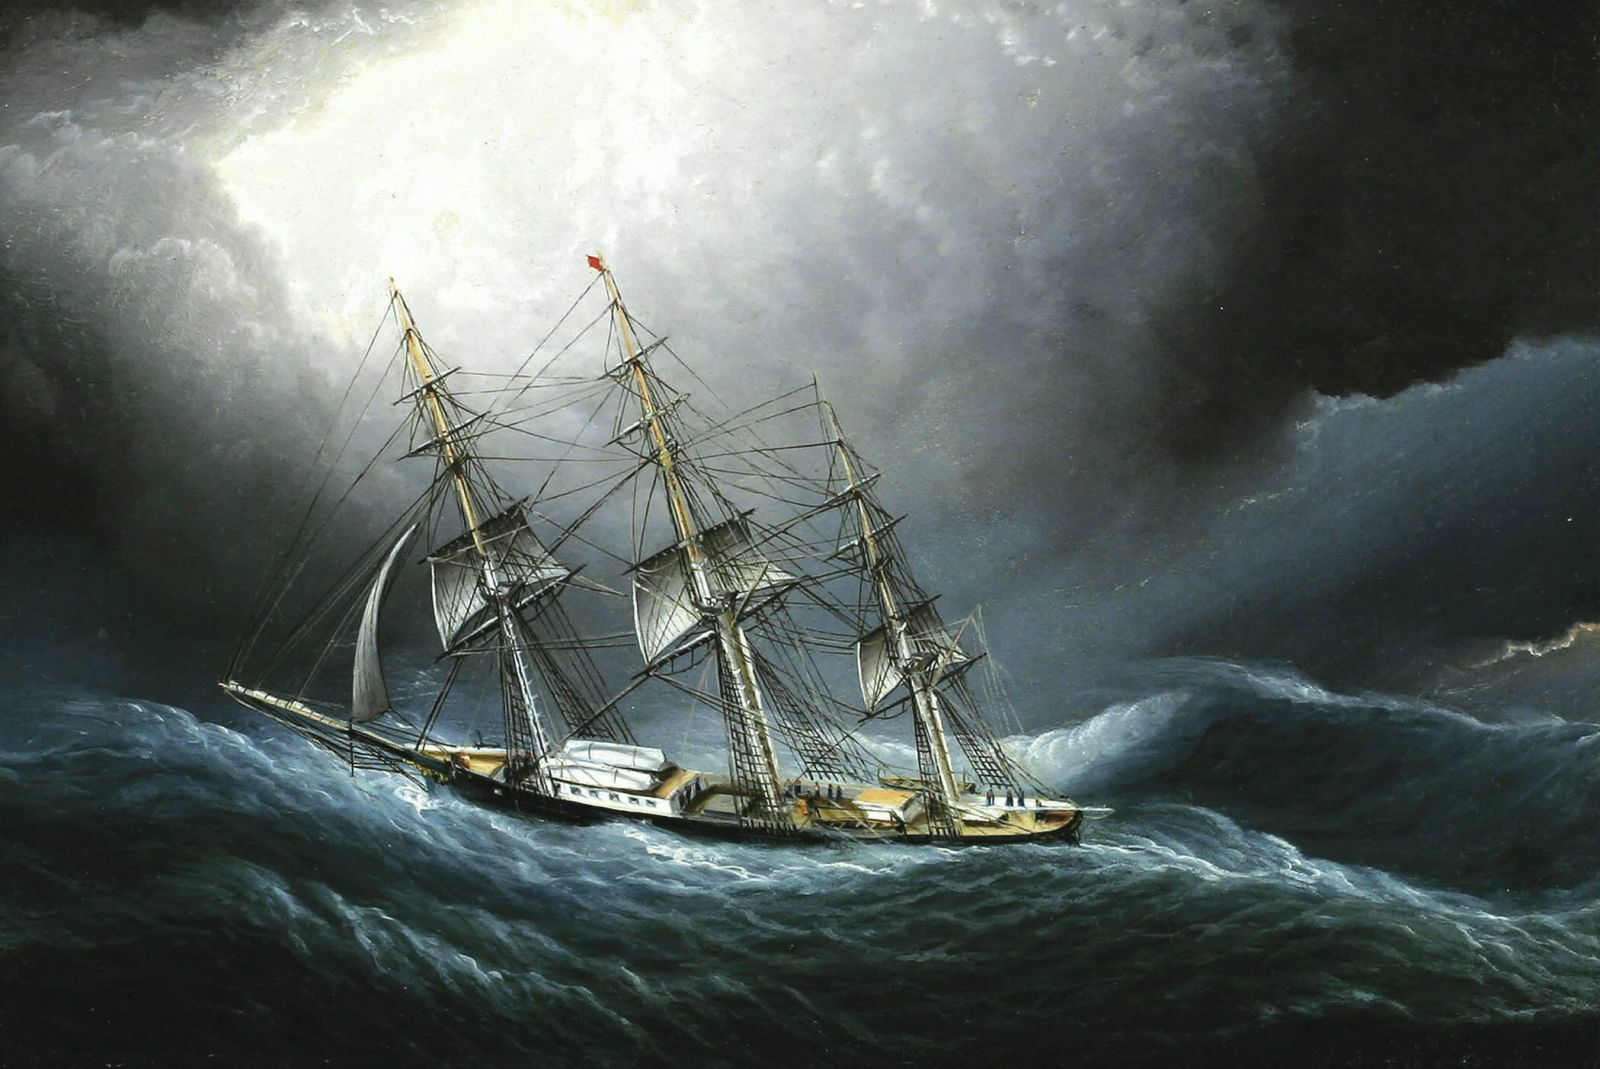 Clipper Ship Rounds the Horn